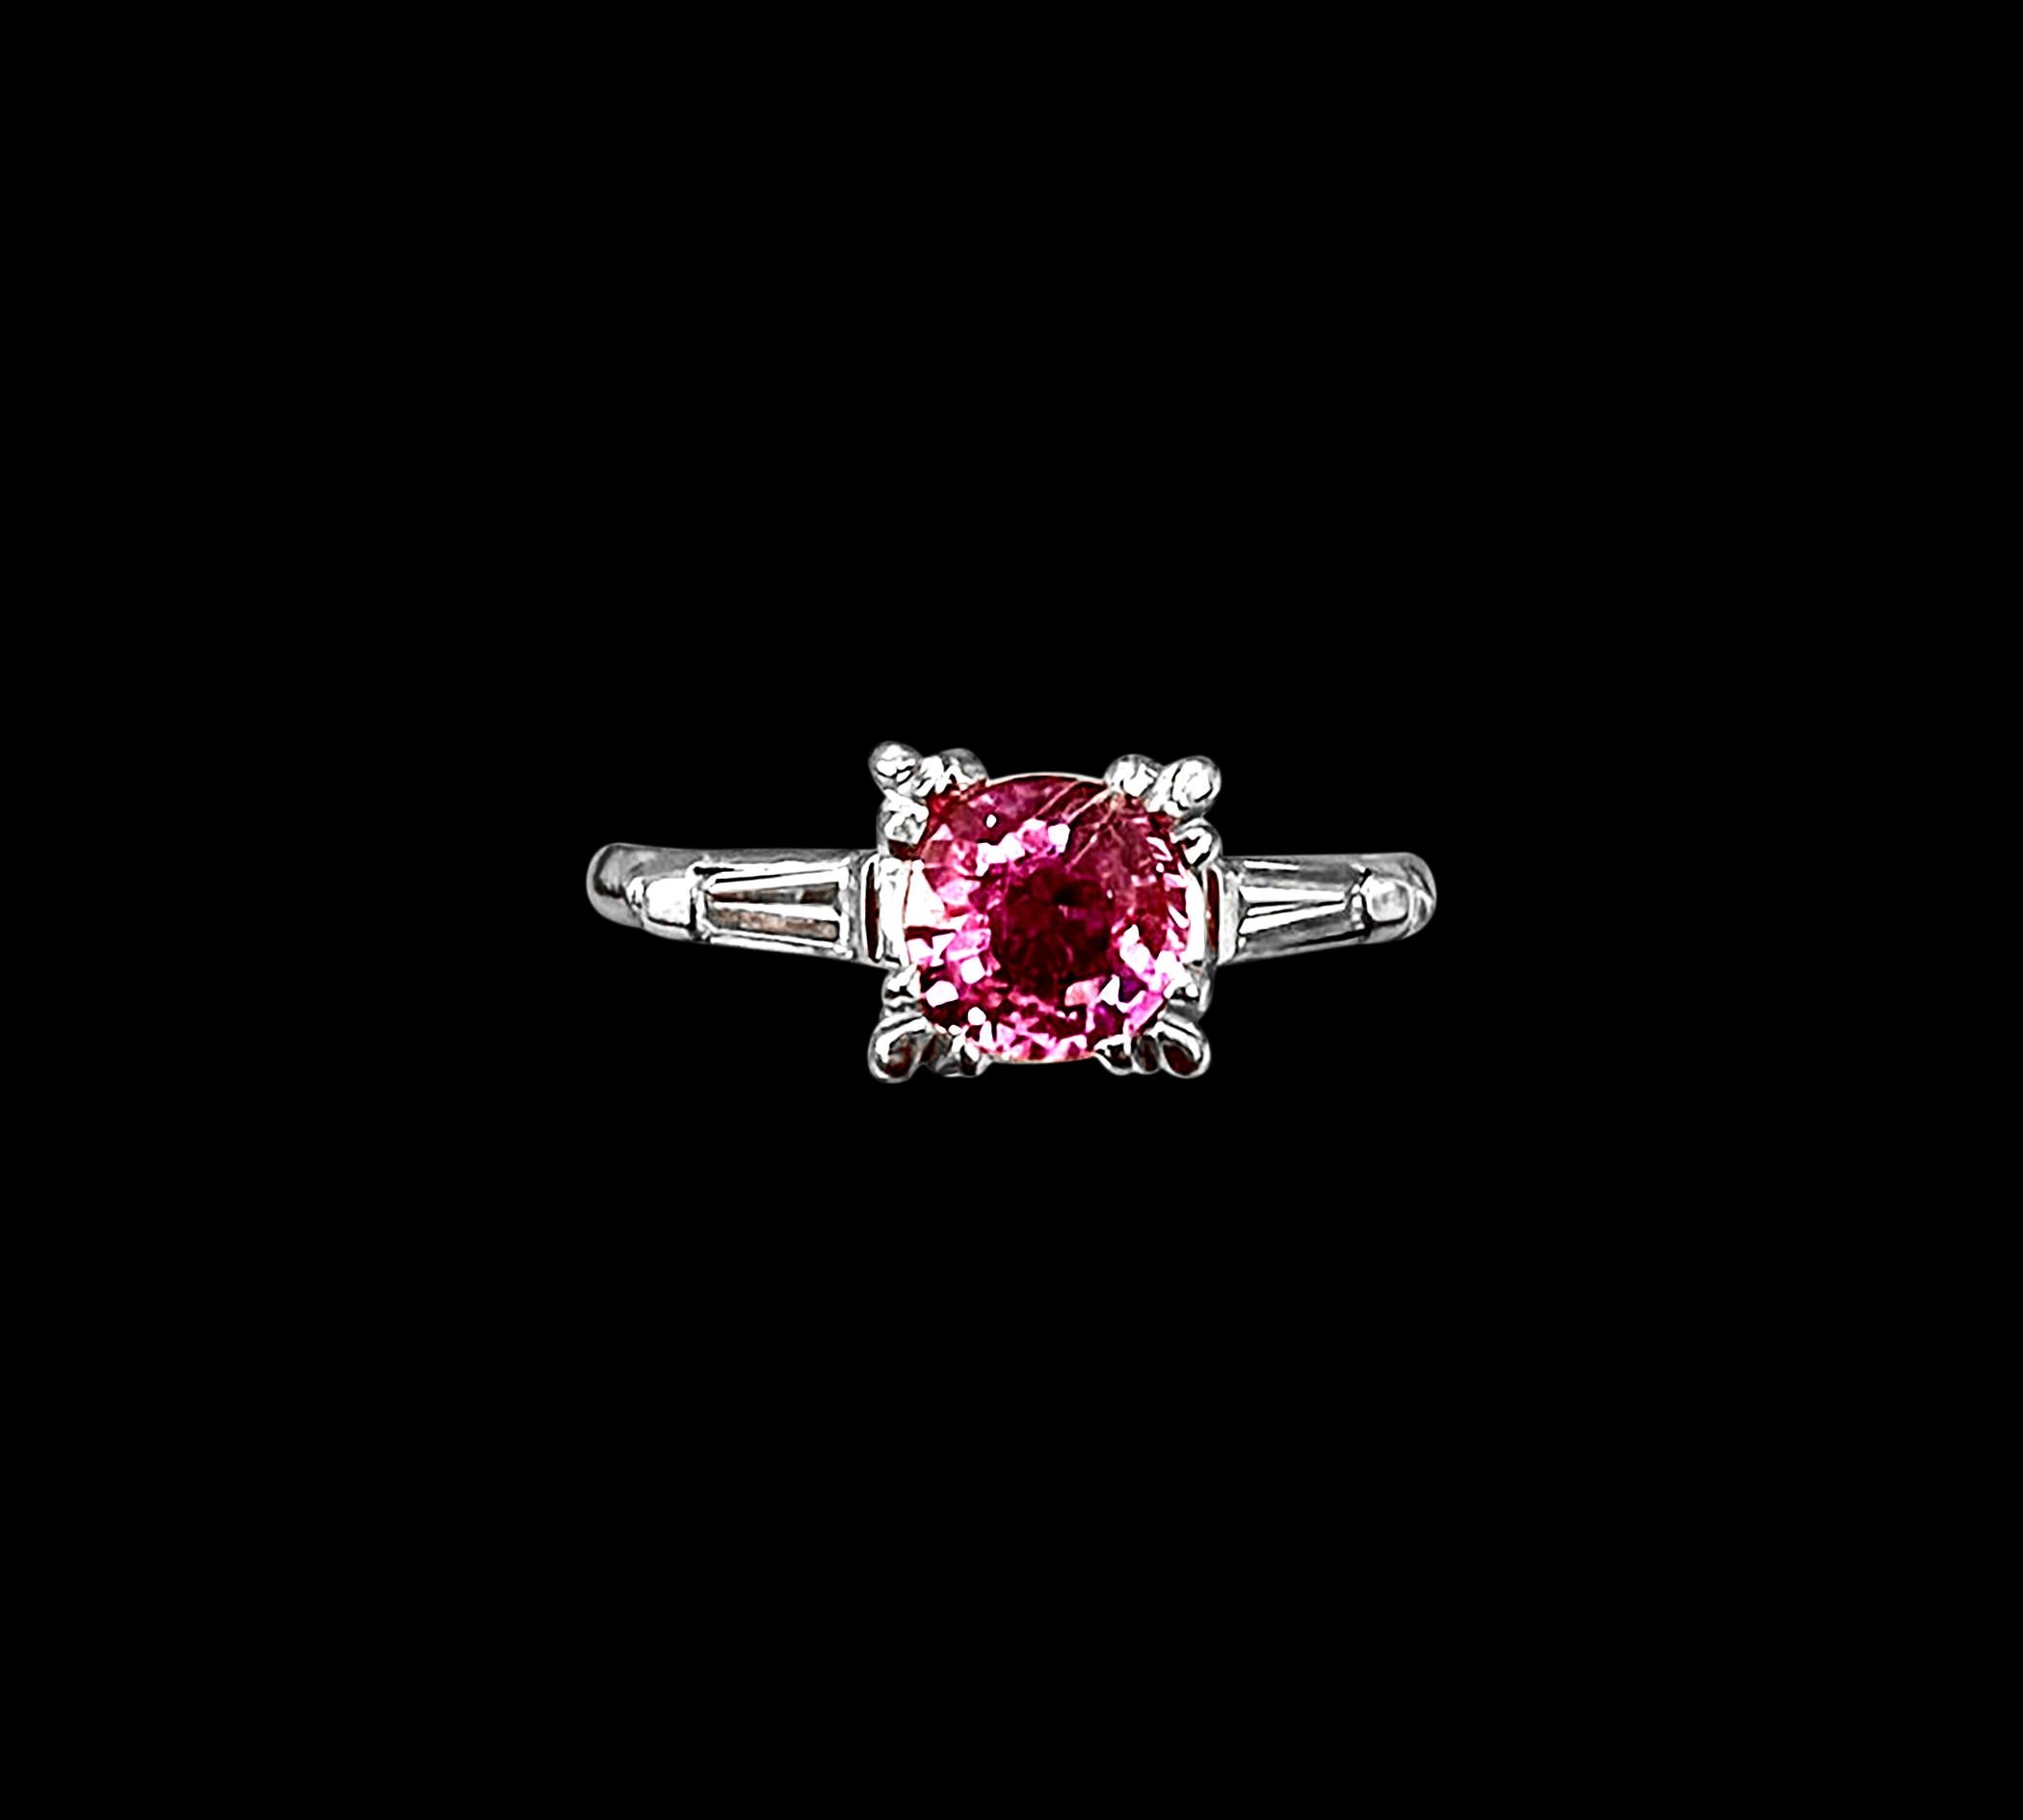 1 Ct Round Pink Sapphire 2 Baguettes Diamond in Platinum Ring, Estate In Excellent Condition For Sale In New York, NY